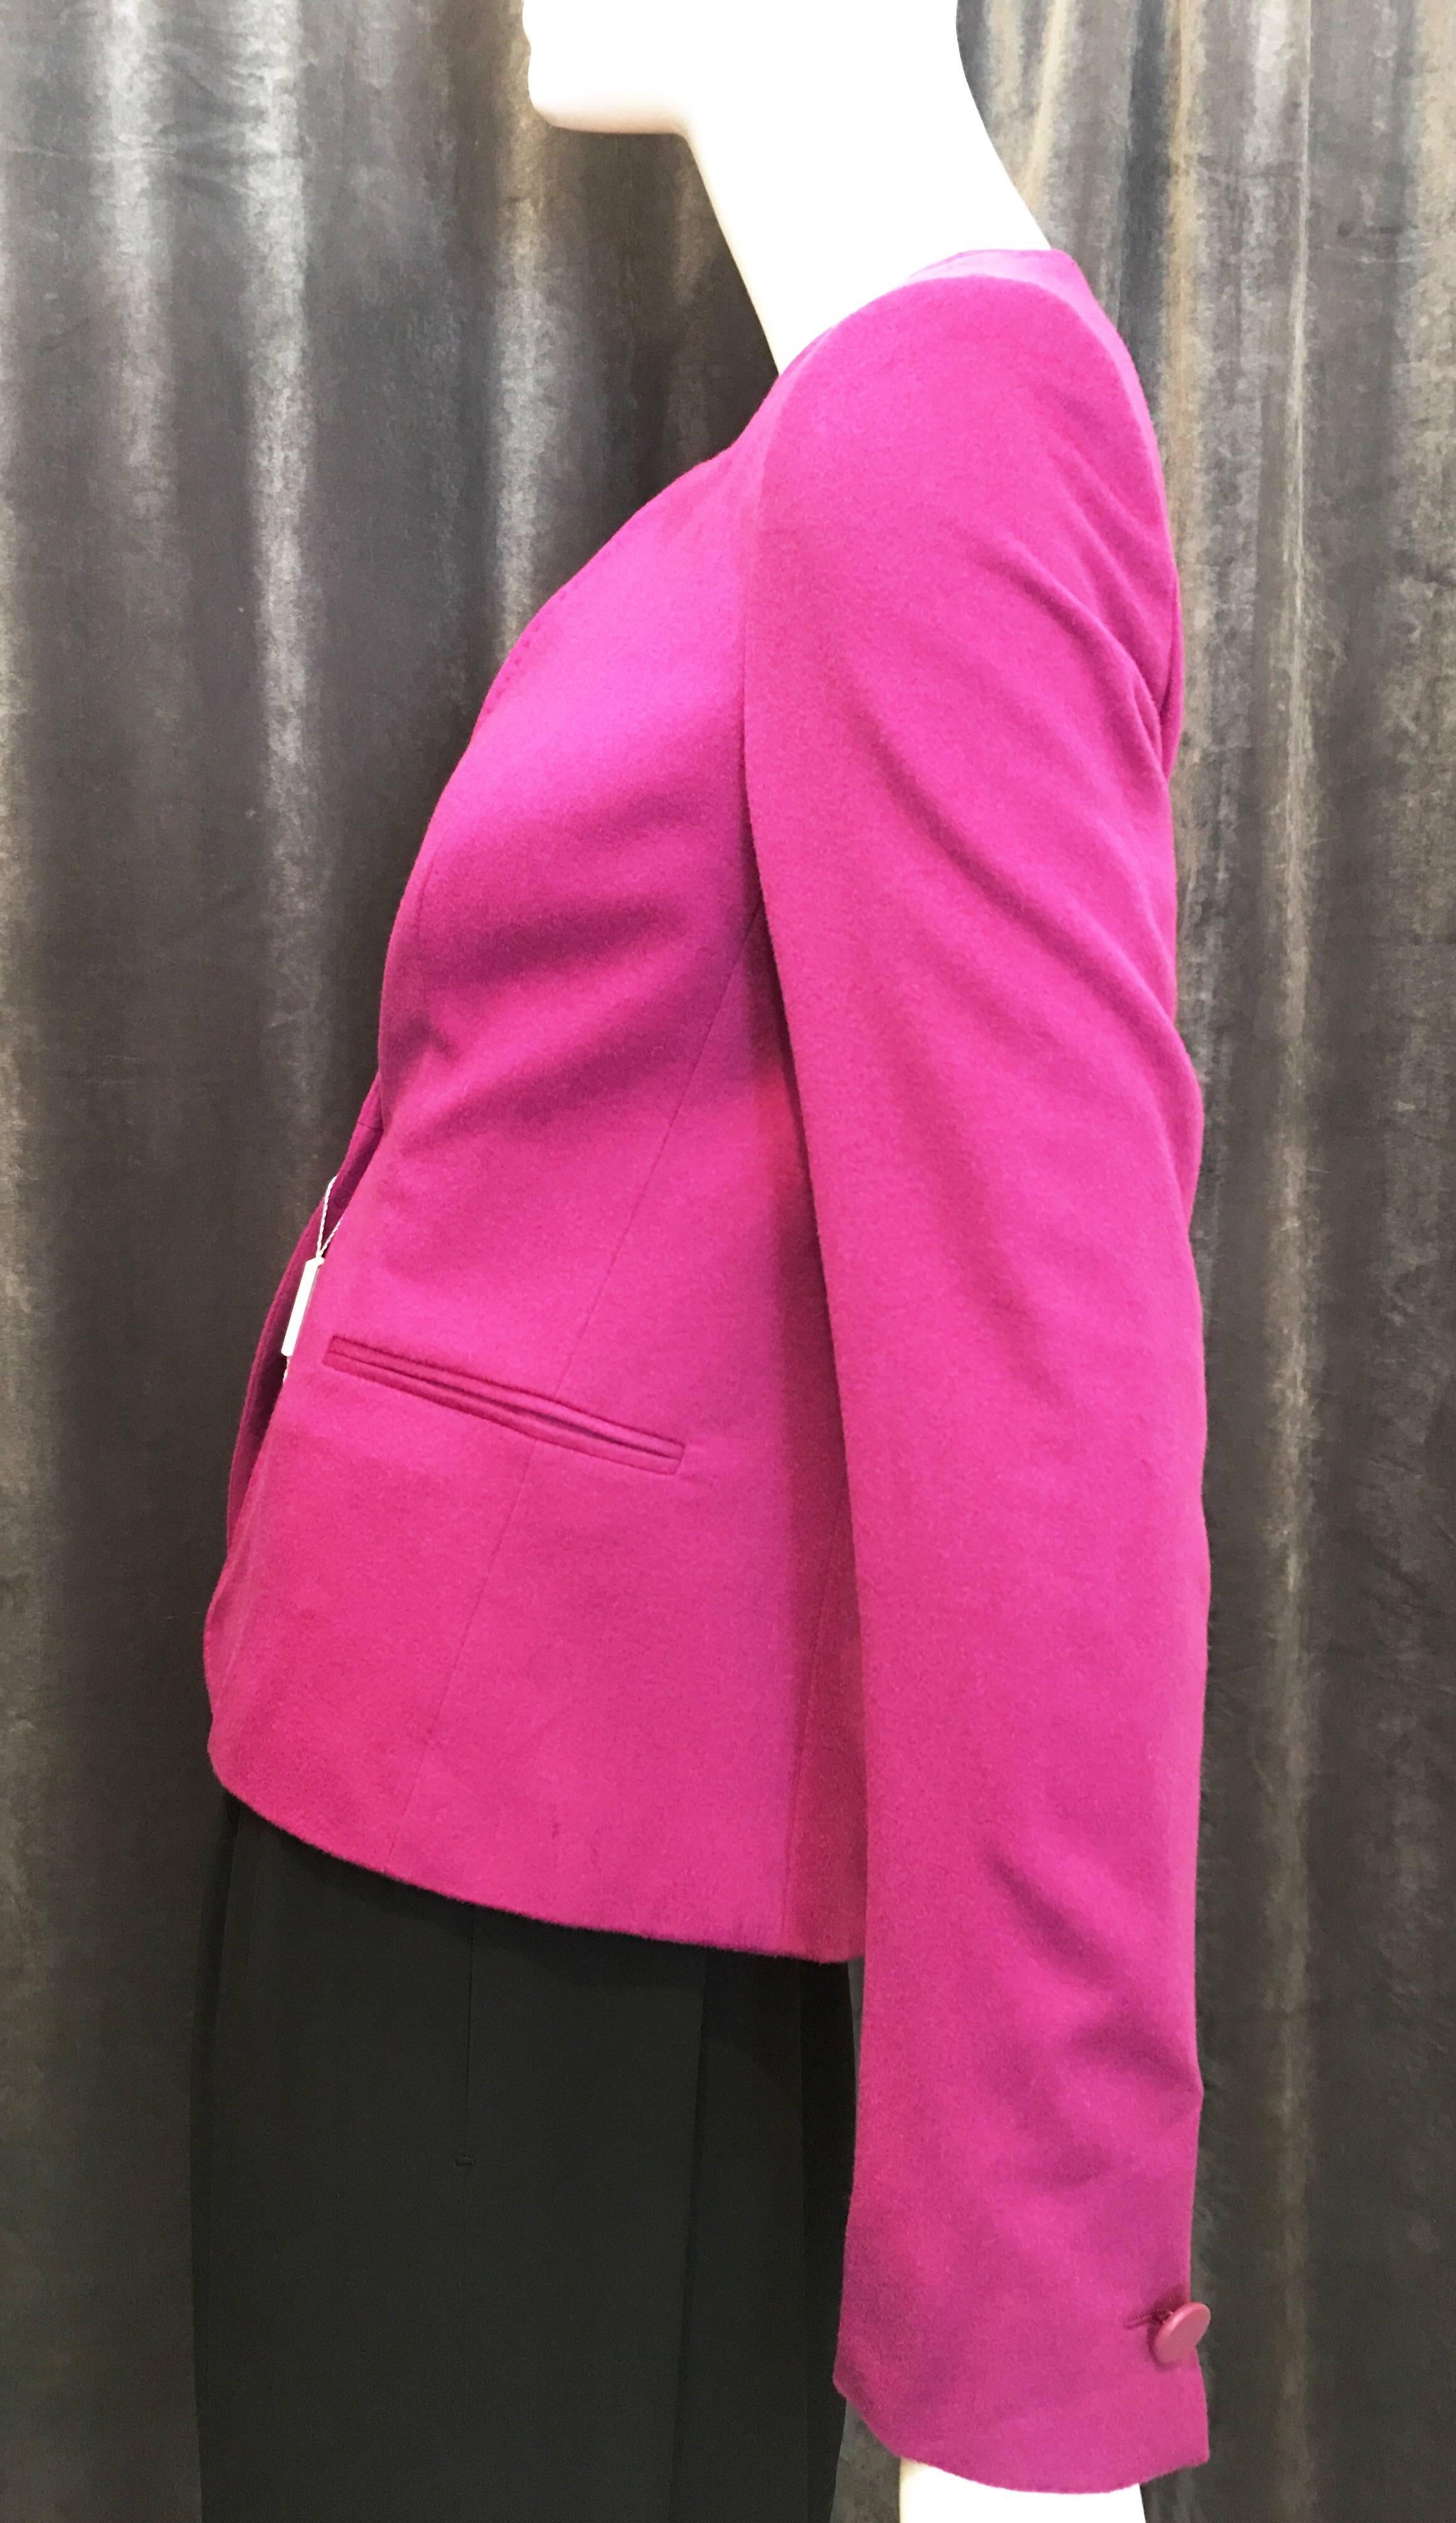 Collarless purple blazer with running stitch at collar and down front of jacket. Single leather button closure. Small shoulder pads. Fully lined with logo stamped fabric. Single decorative leather buttons at cuffs. Two front pockets. Classic style